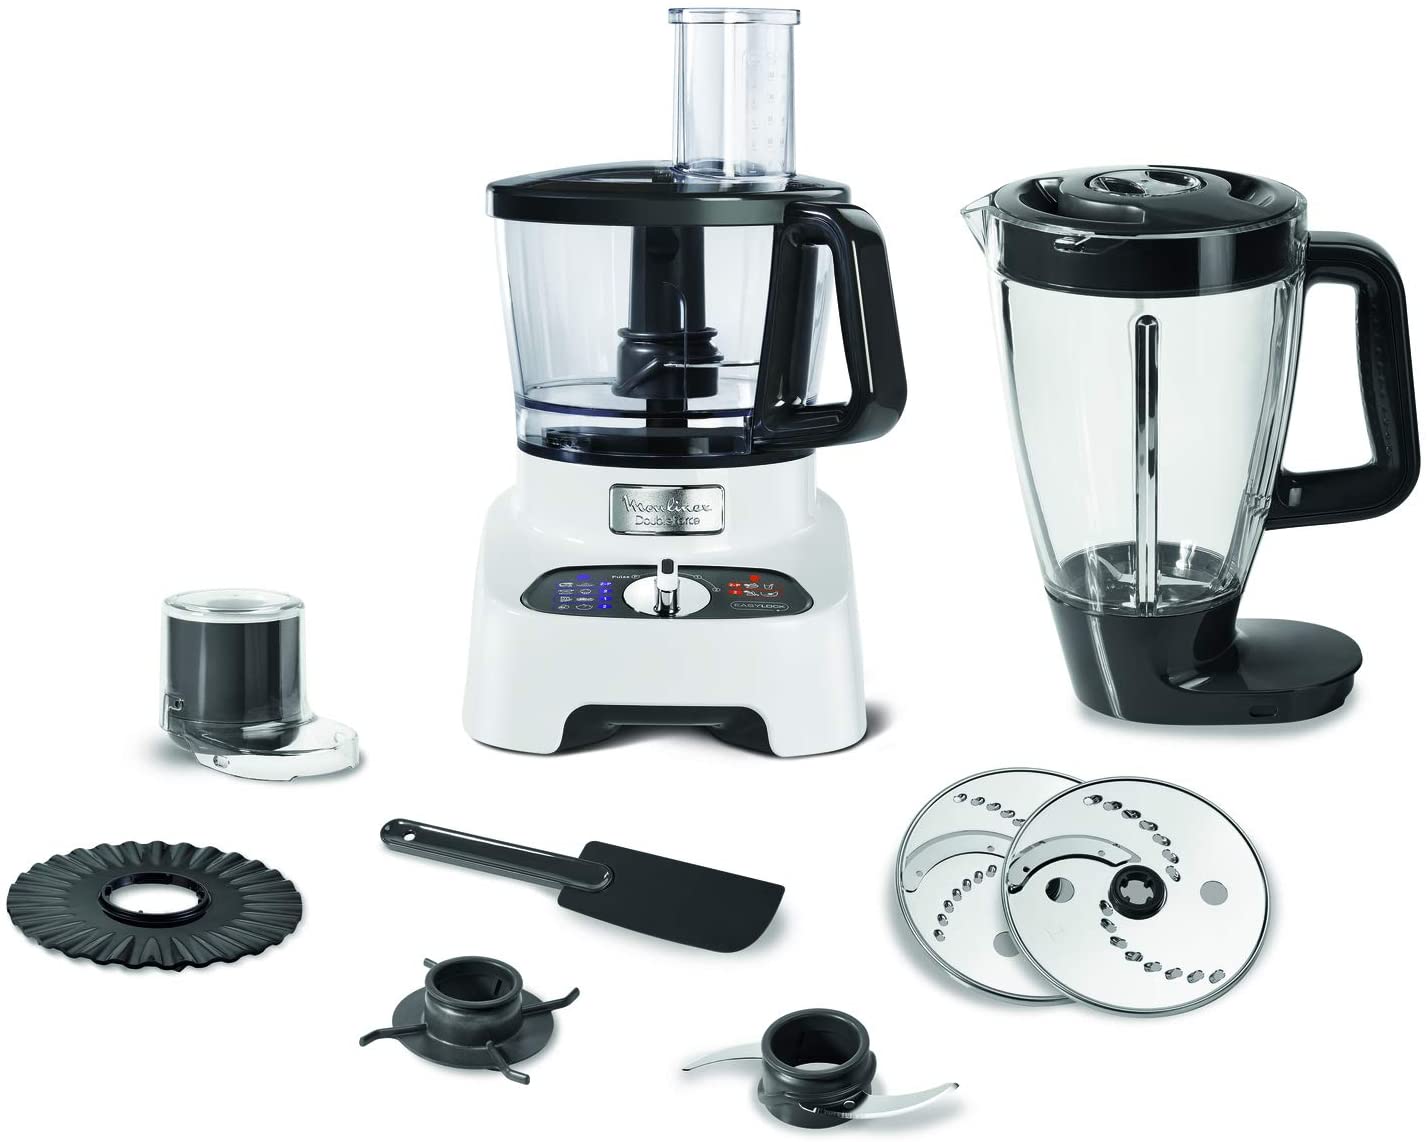 Moulinex FP8221 Double Force Food Processor with 2 Outputs Motor